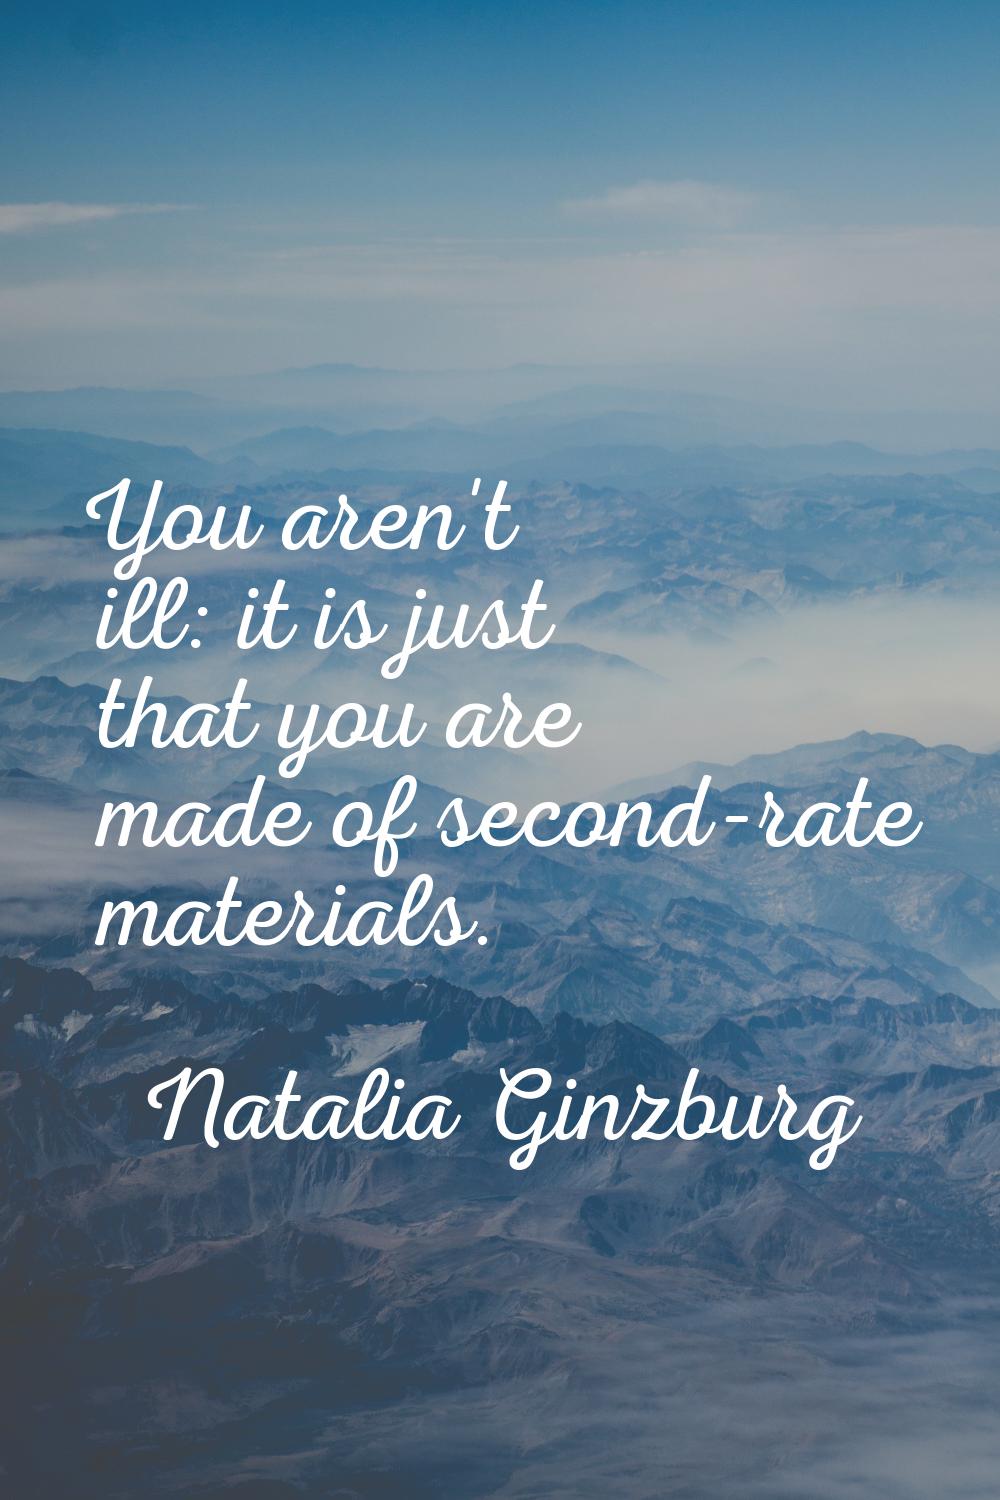 You aren't ill: it is just that you are made of second-rate materials.